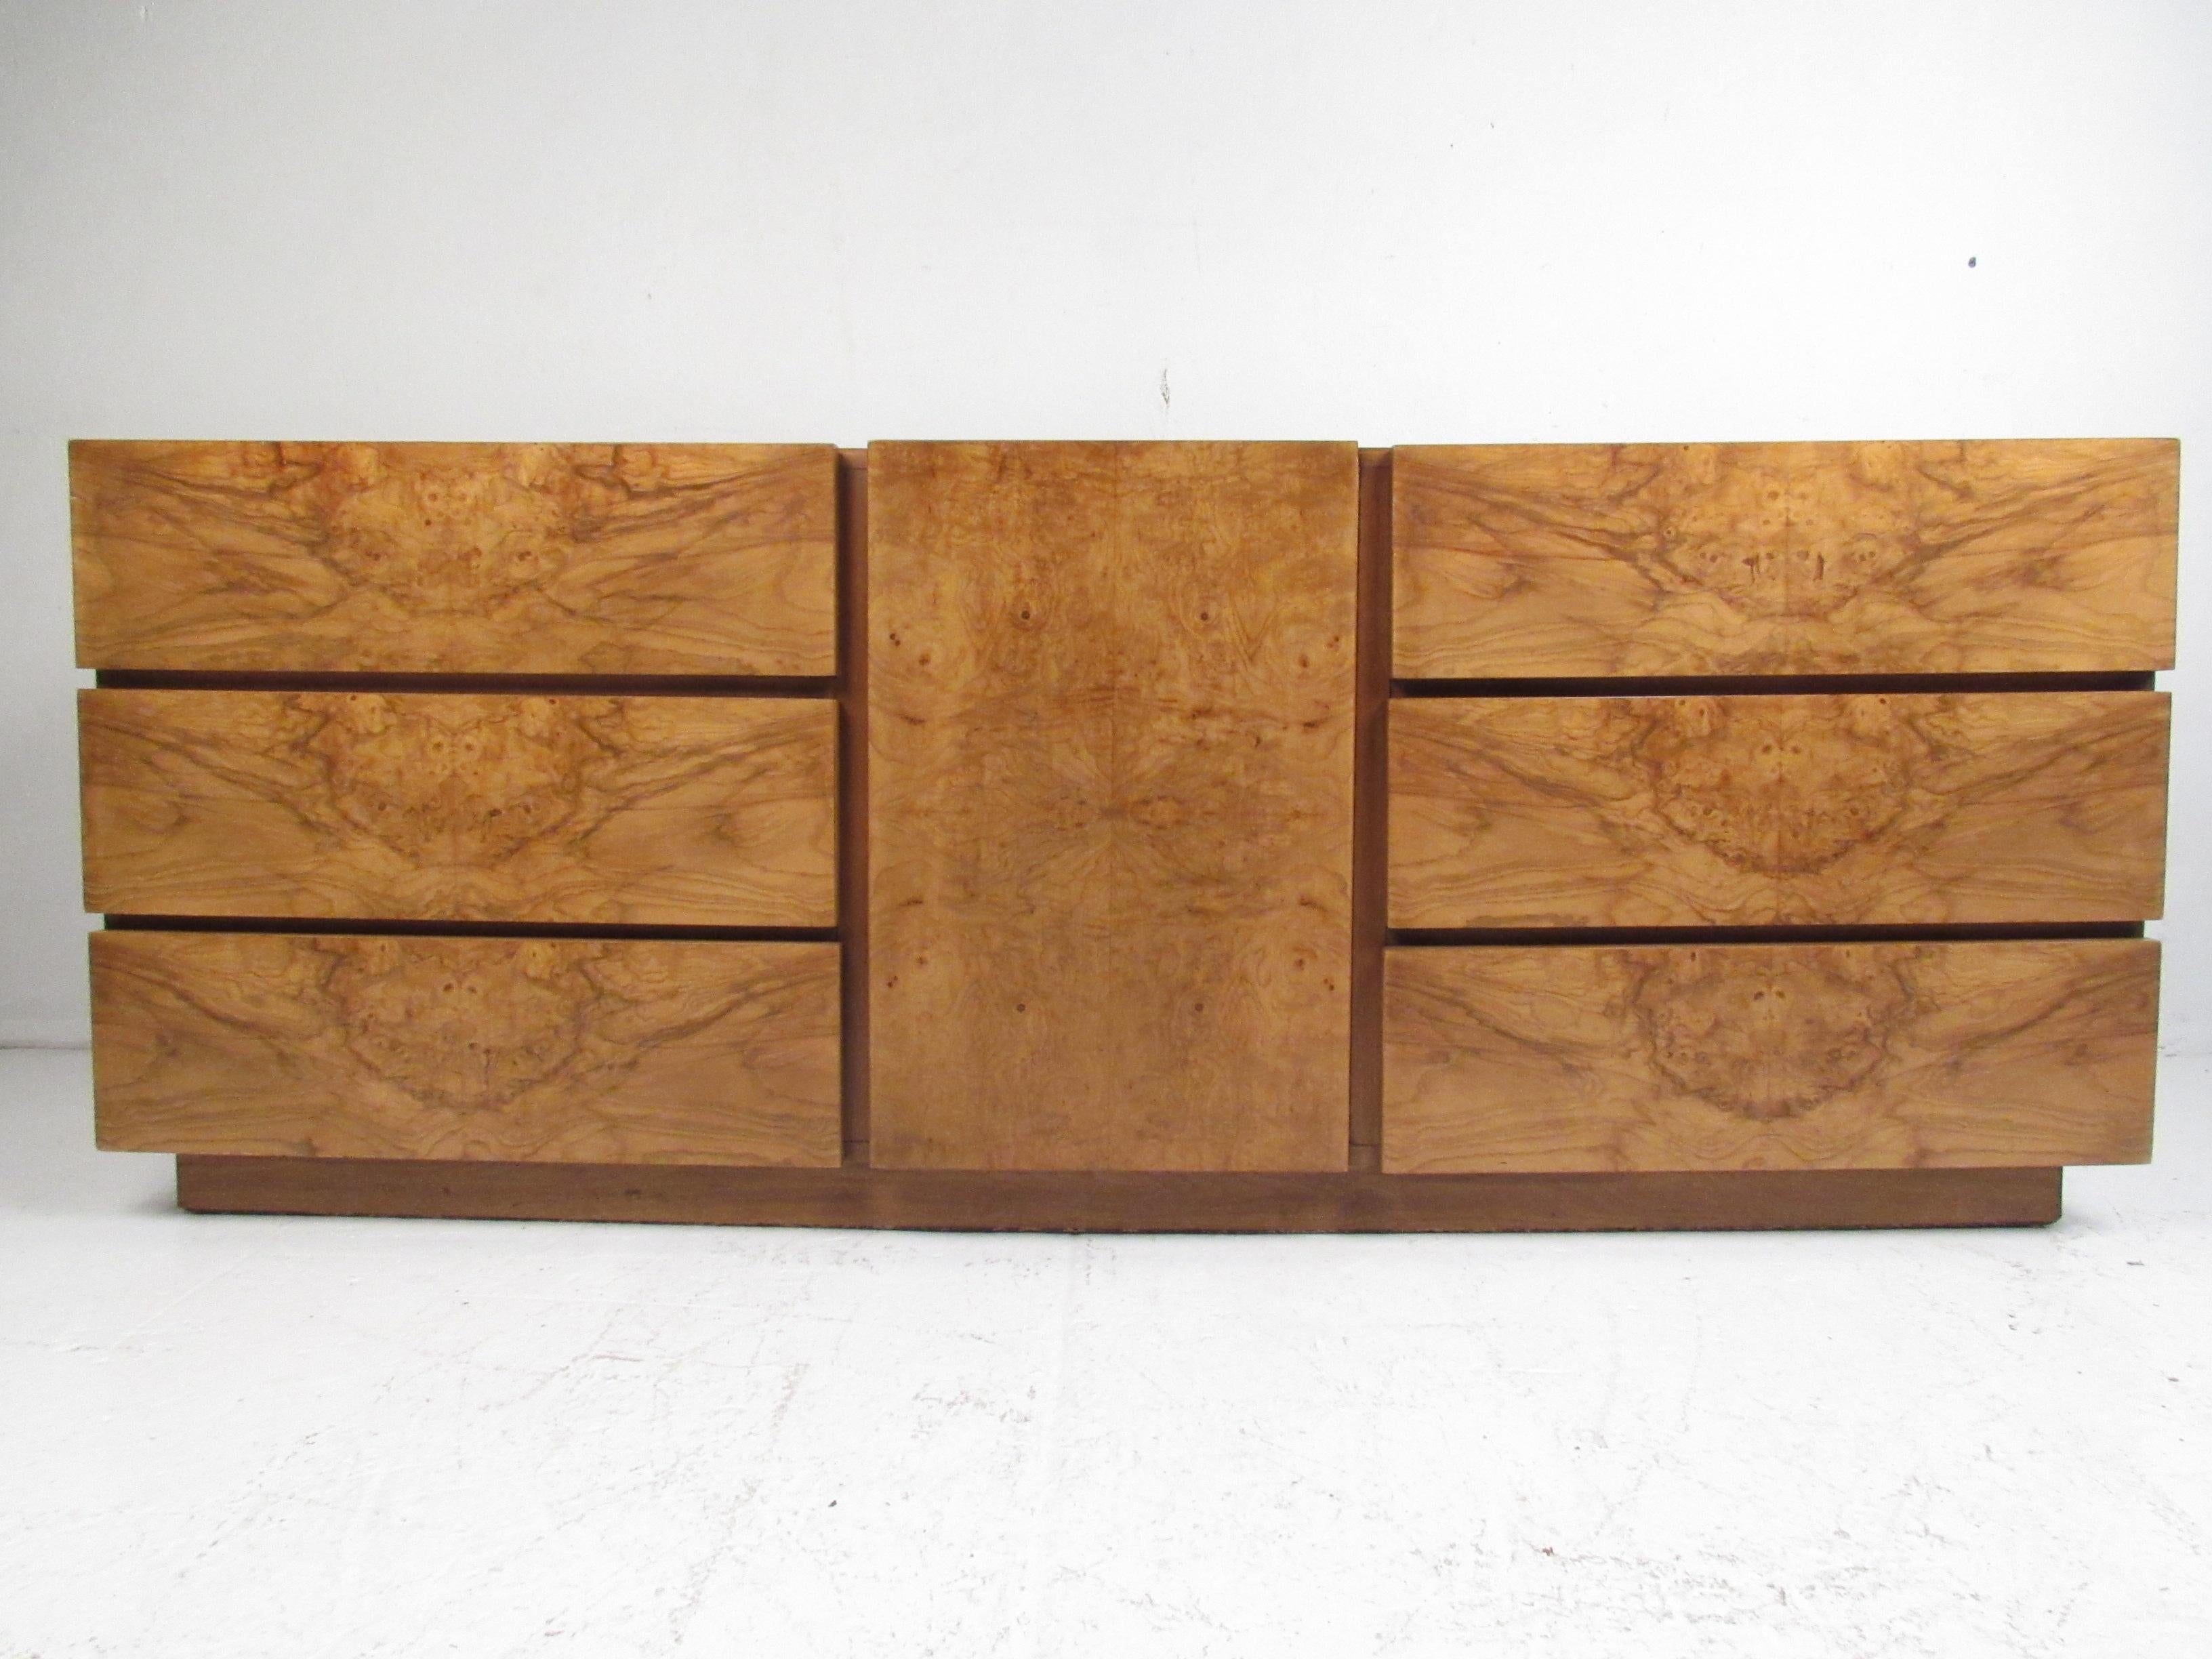 This stunning vintage modern dresser features nine hefty drawers ensuring plenty of room for storage. A lovely straight line design with an elegant burl maple finish and three drawers in the centre hidden by a cabinet door. This stylish midcentury